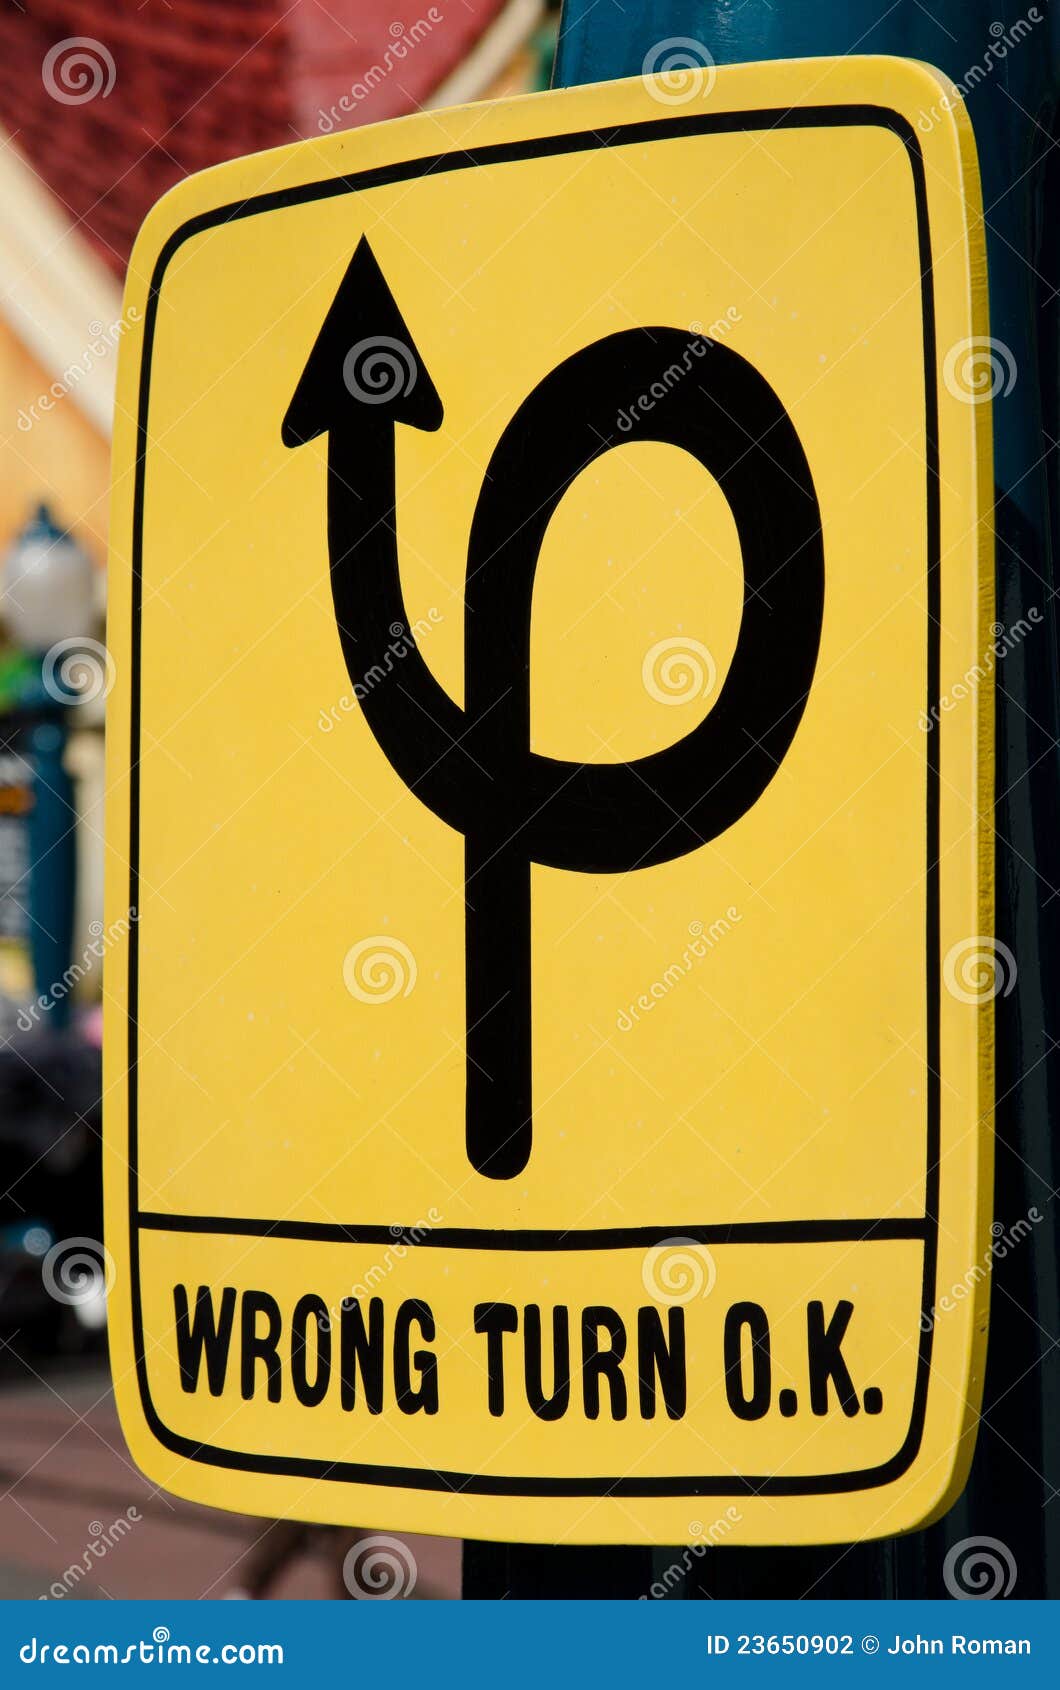 Image result for wrong turning